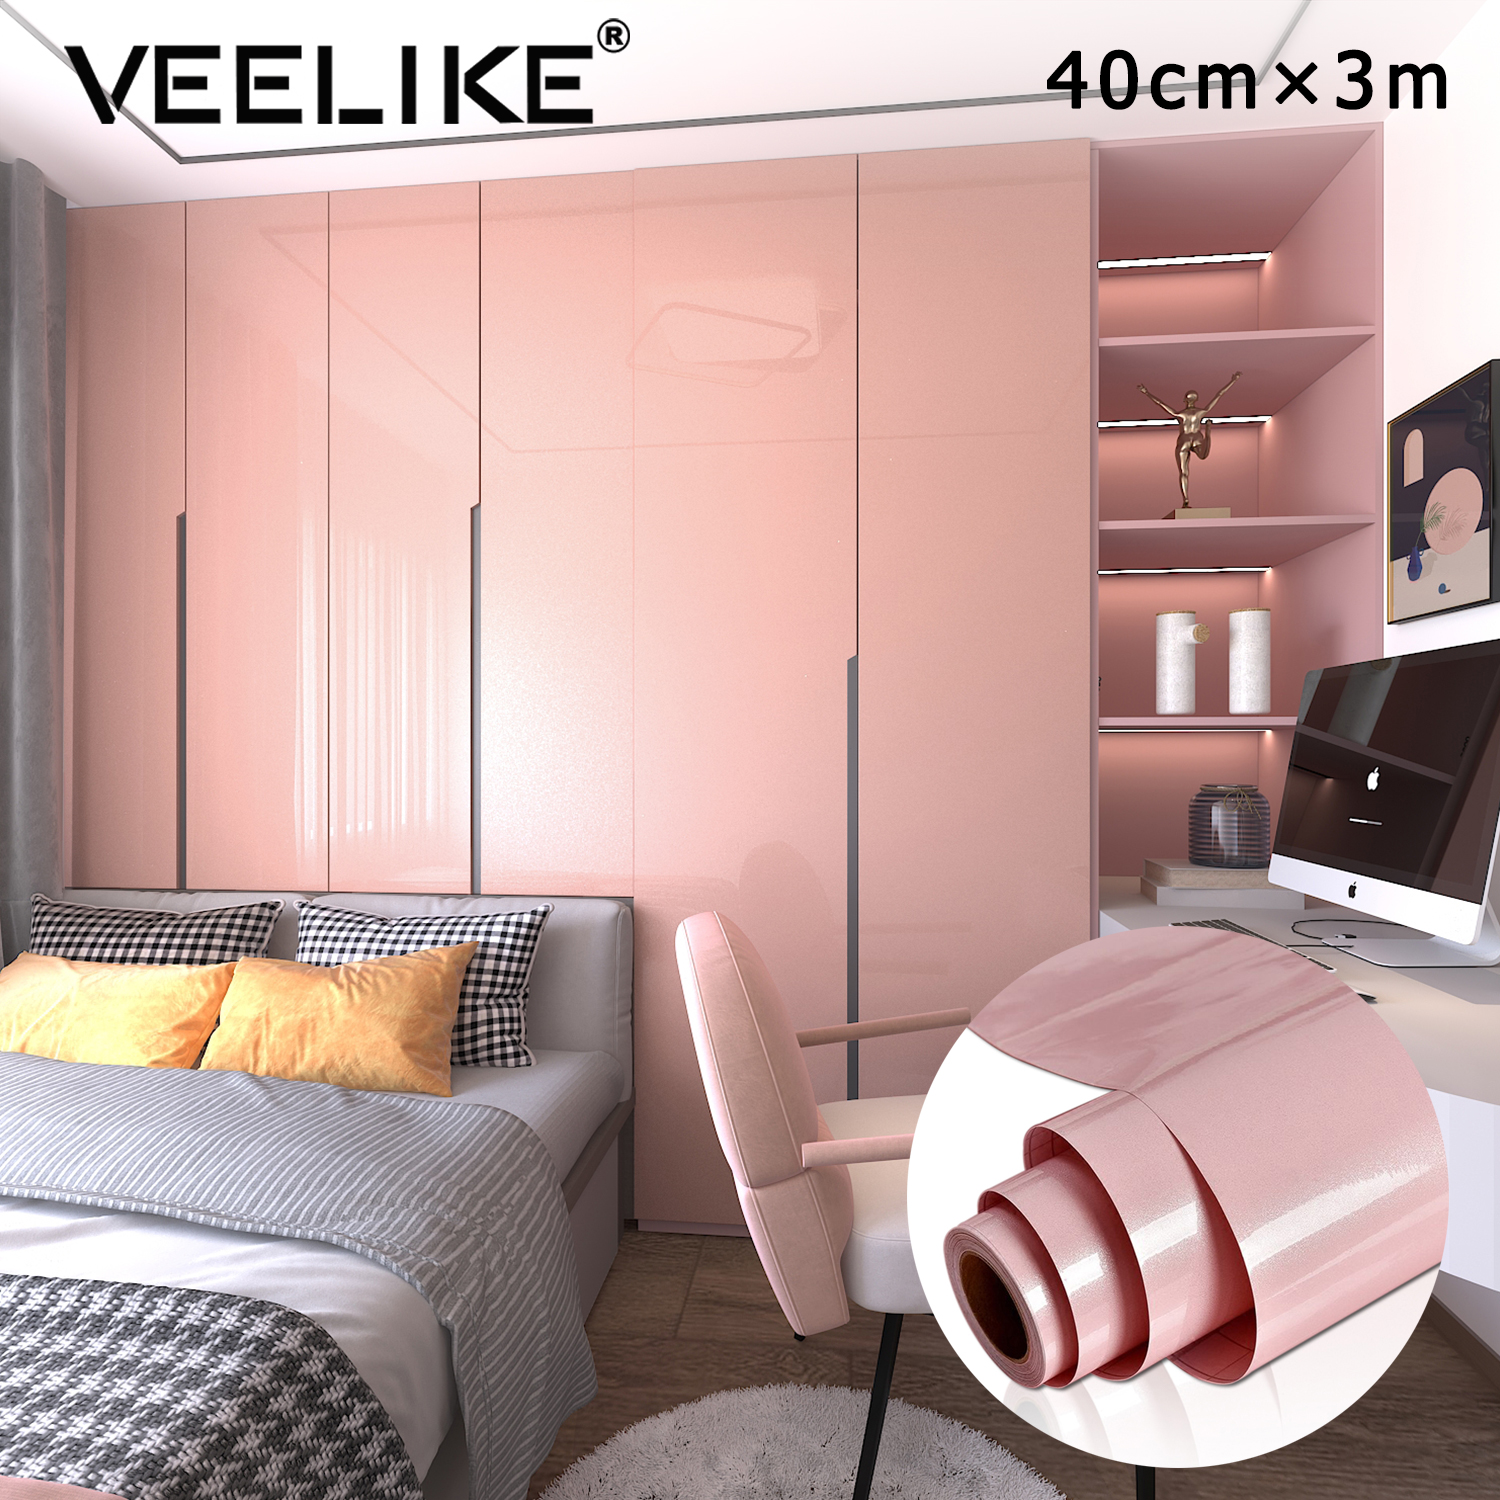 Veelike Glossy Kitchen Cabinet Wallpaper Self Adhesive Wall Stickers Waterproof Oil-proof Contact Paper for Kitchen Countertops Peel and Stick Vinyl Removable 40cm×3m